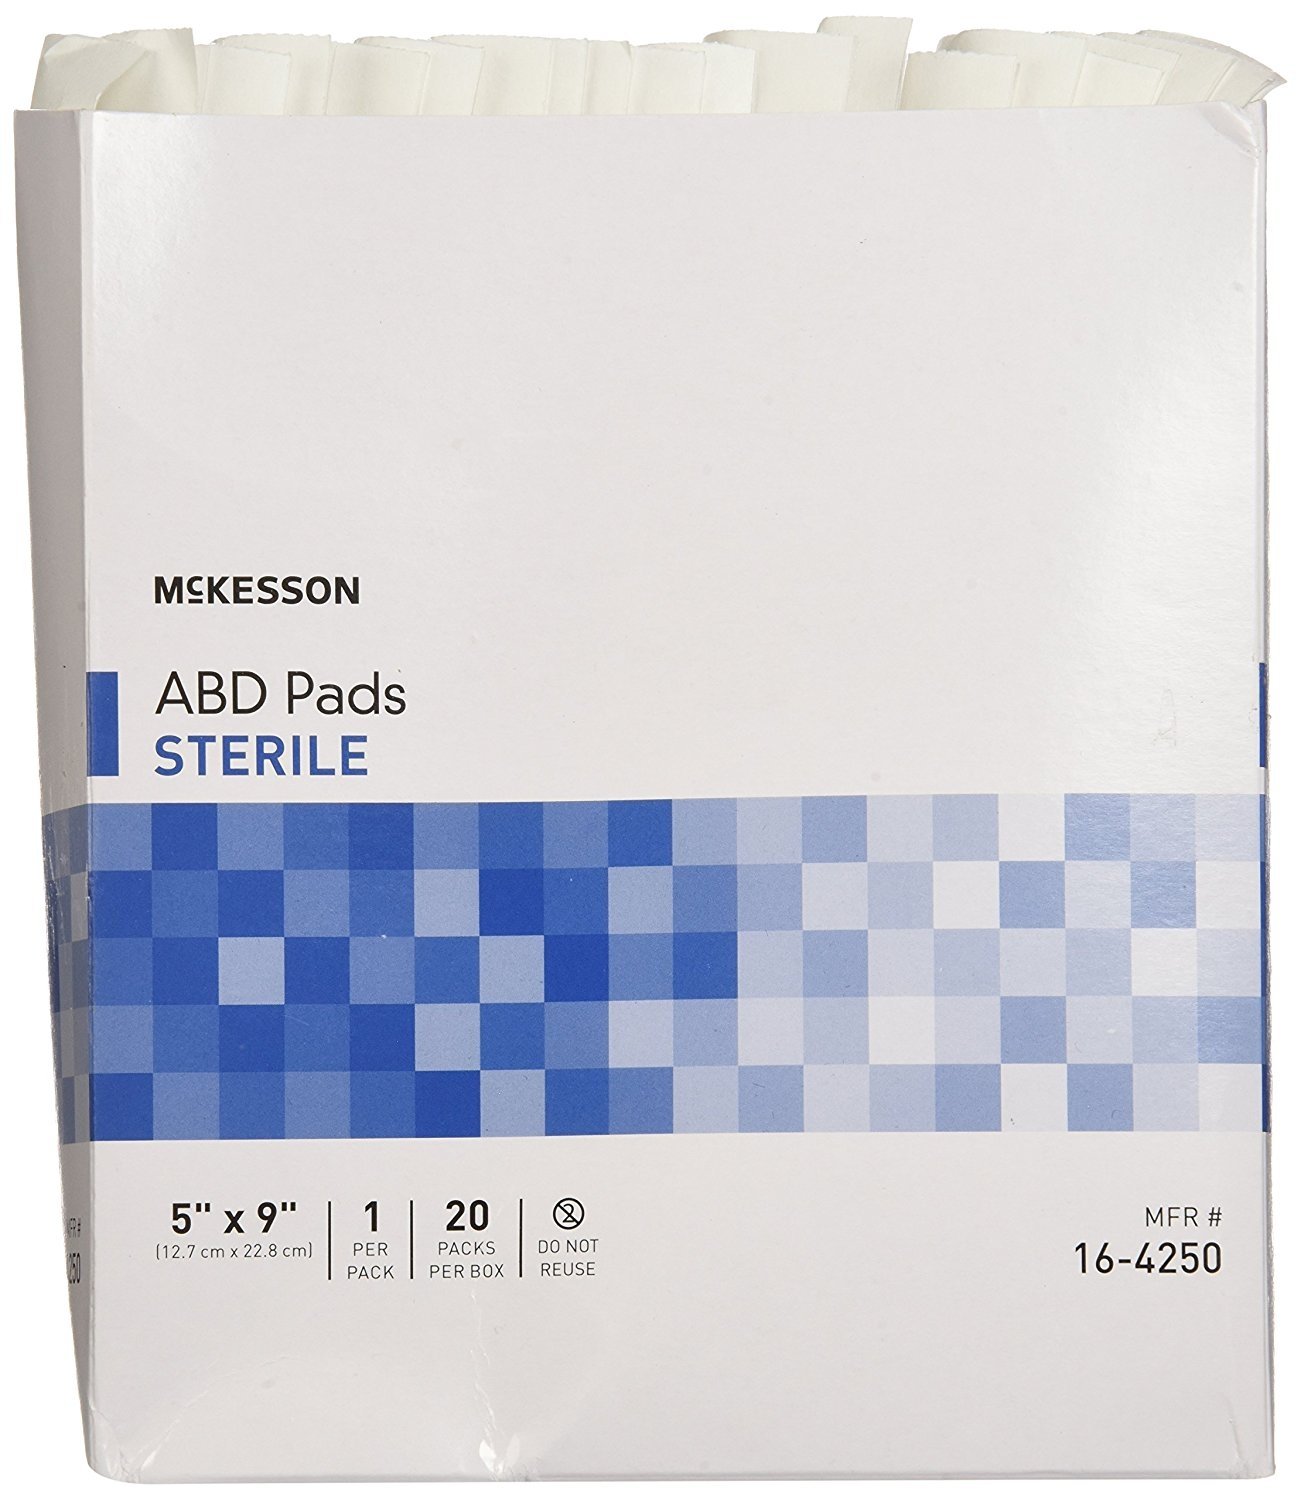 McKesson Sterile Performance ABD Pads, 42502000, 5" x 9", 20 Count - image 3 of 4